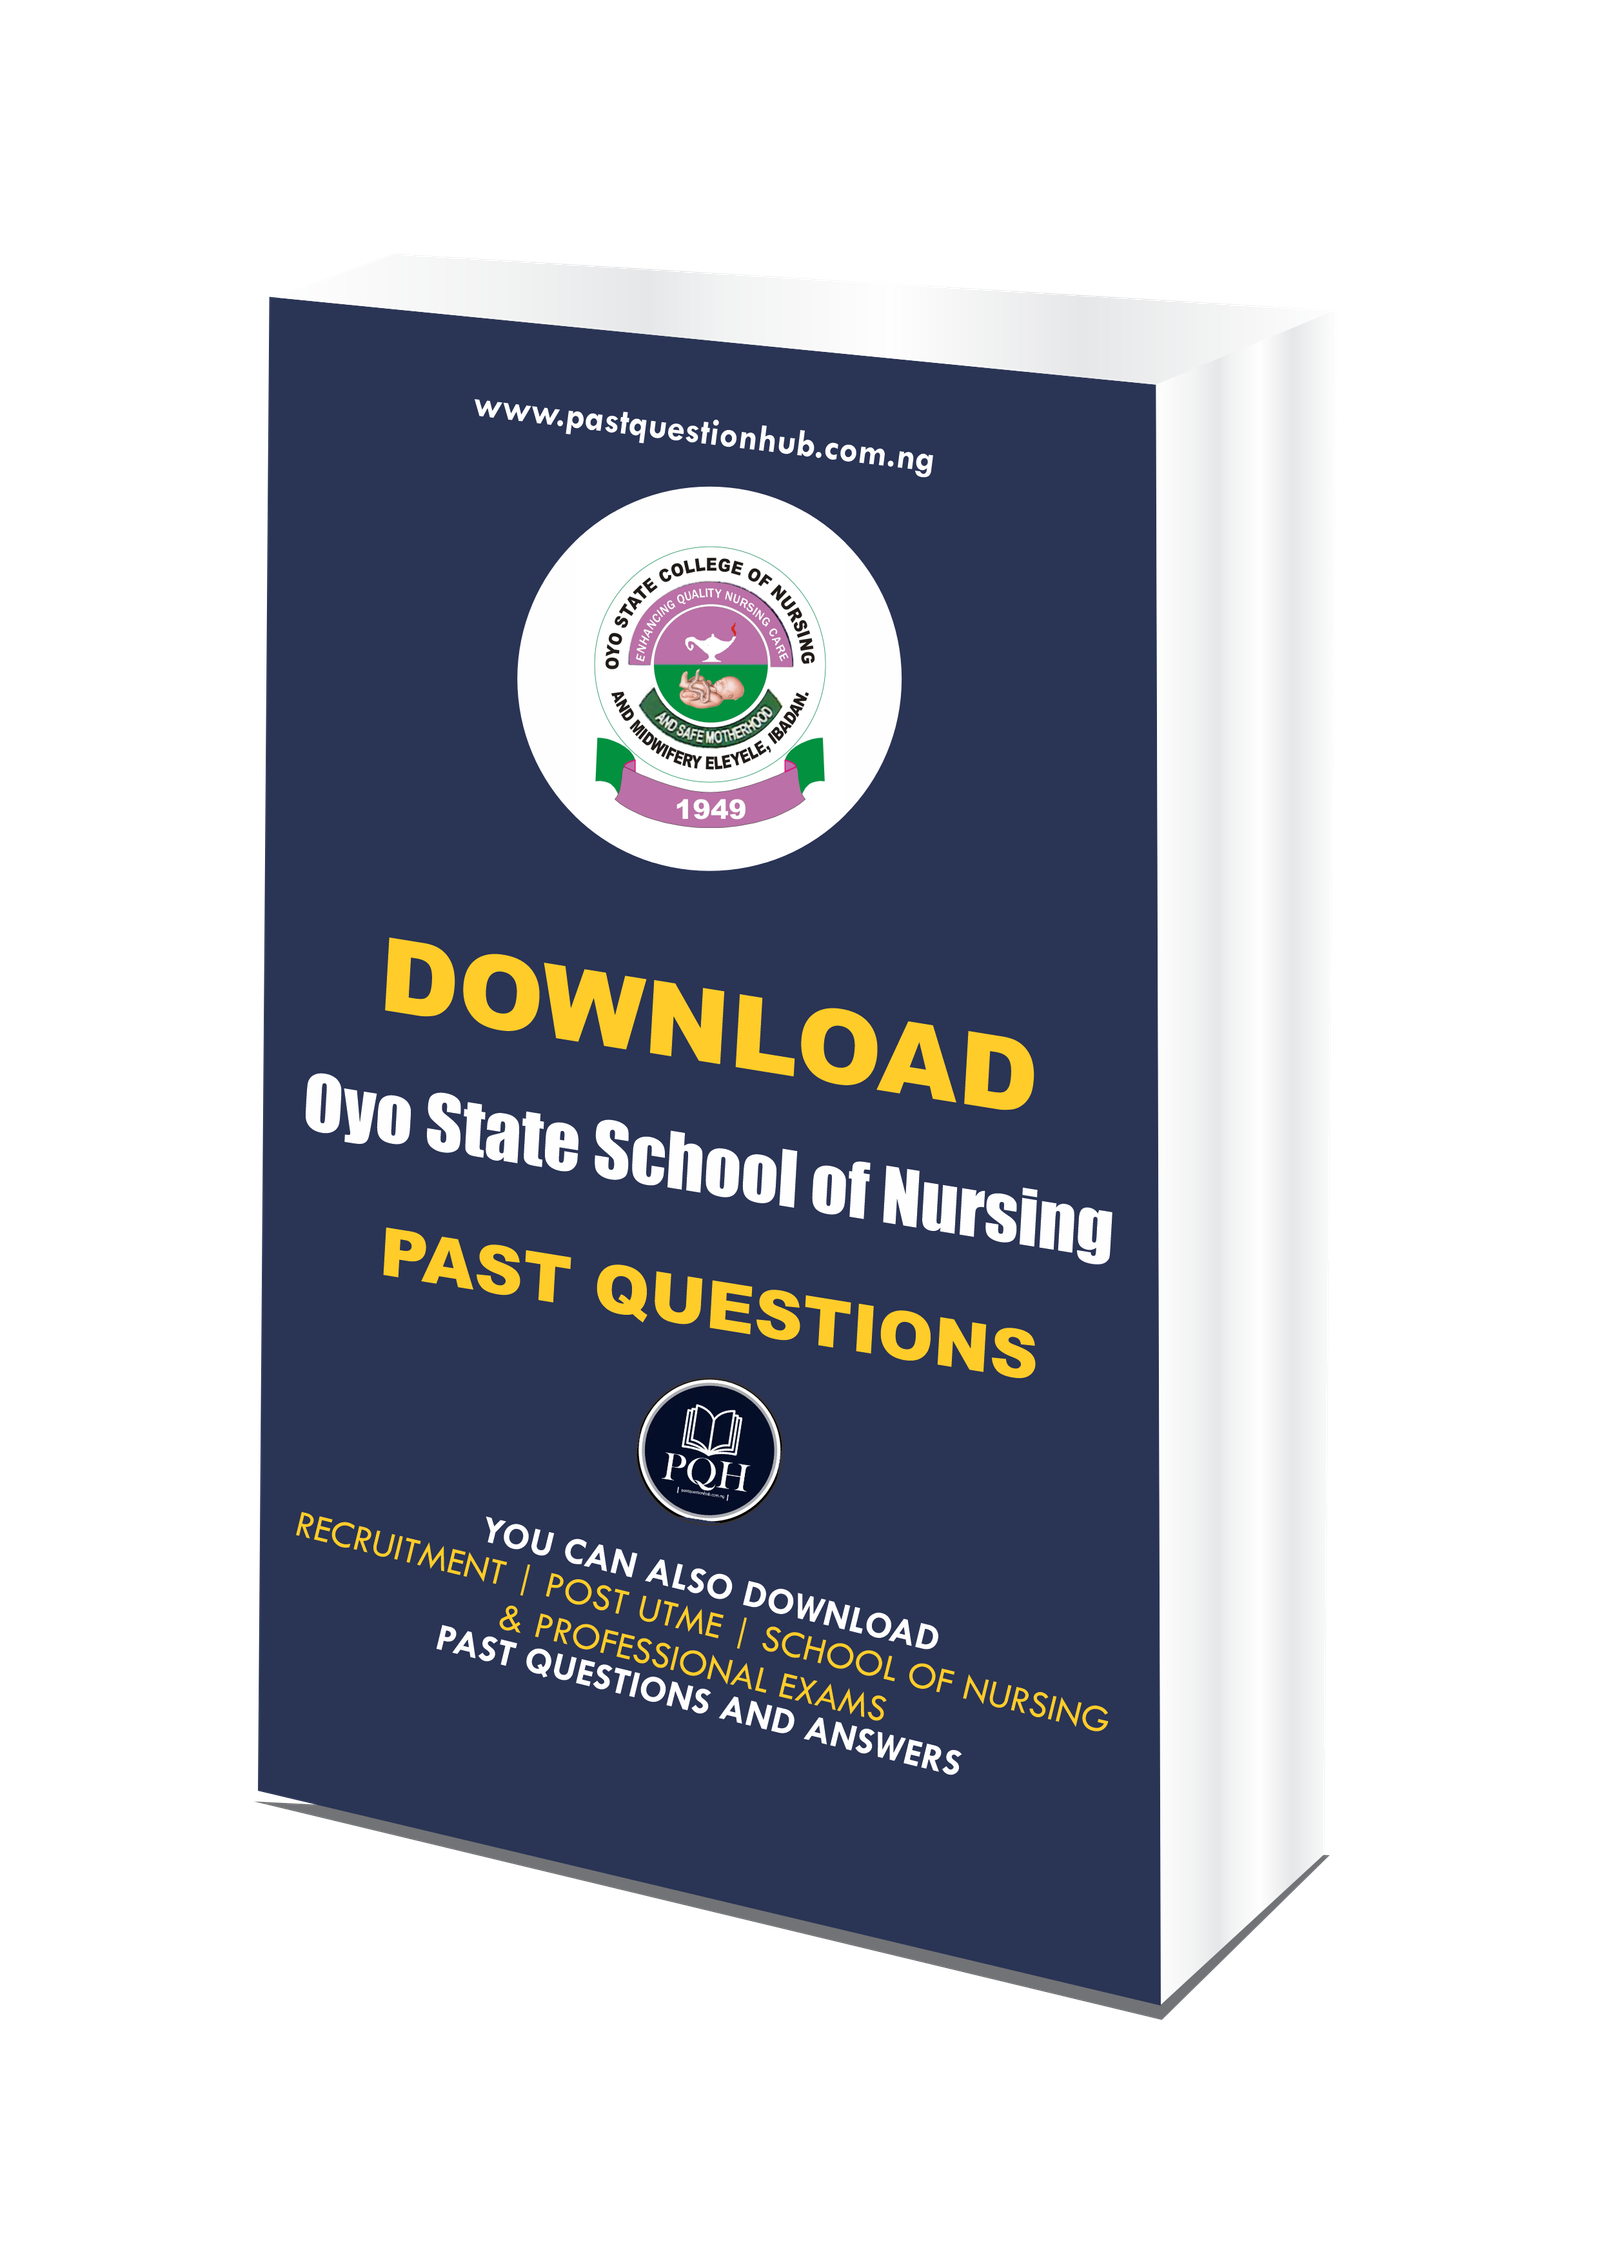 Oyo State School of Nursing Past Questions and Answers PDF